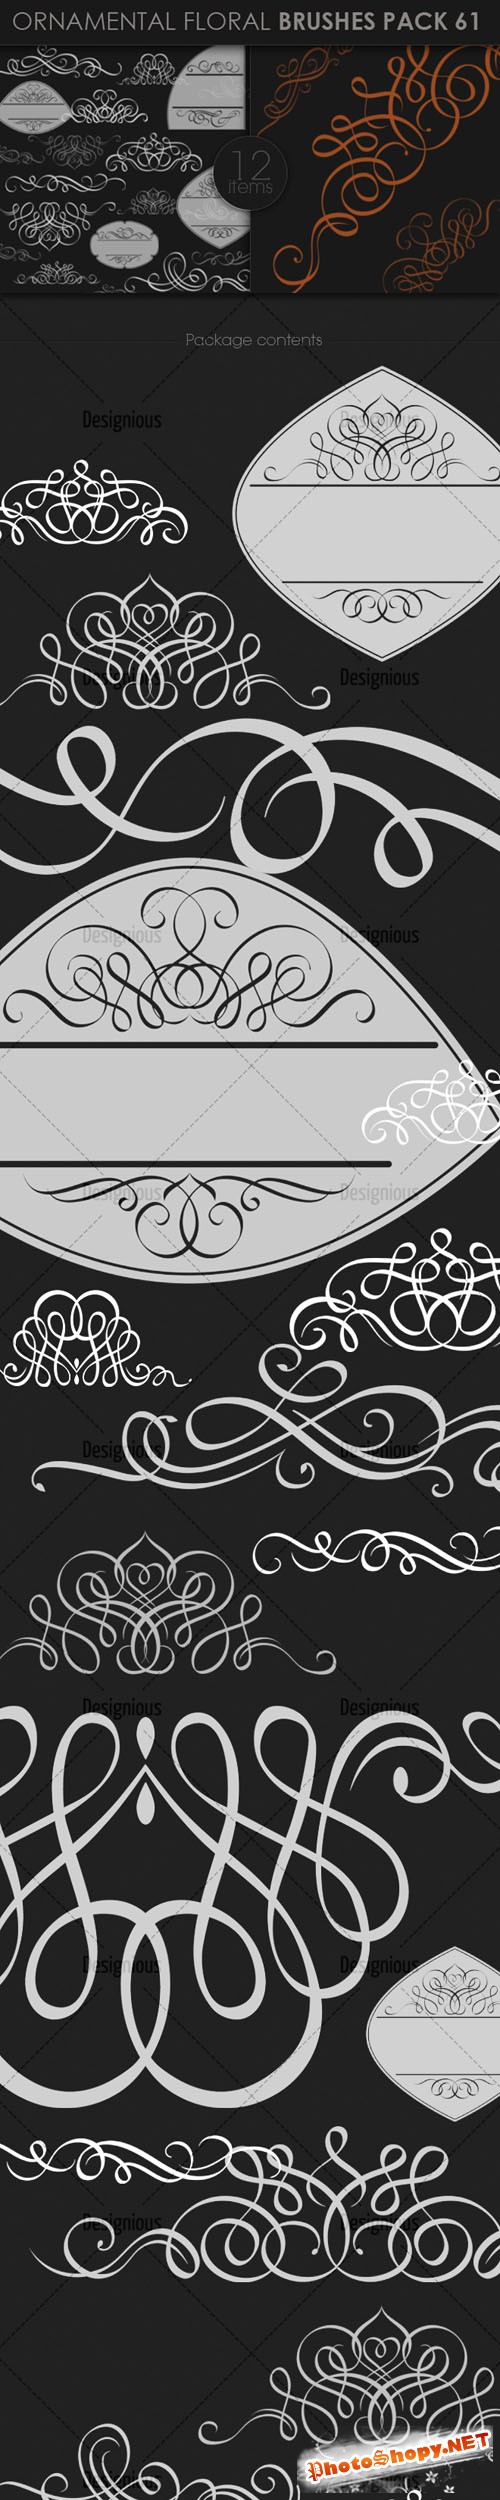 Ornamental Floral Photoshop Brushes Pack 61